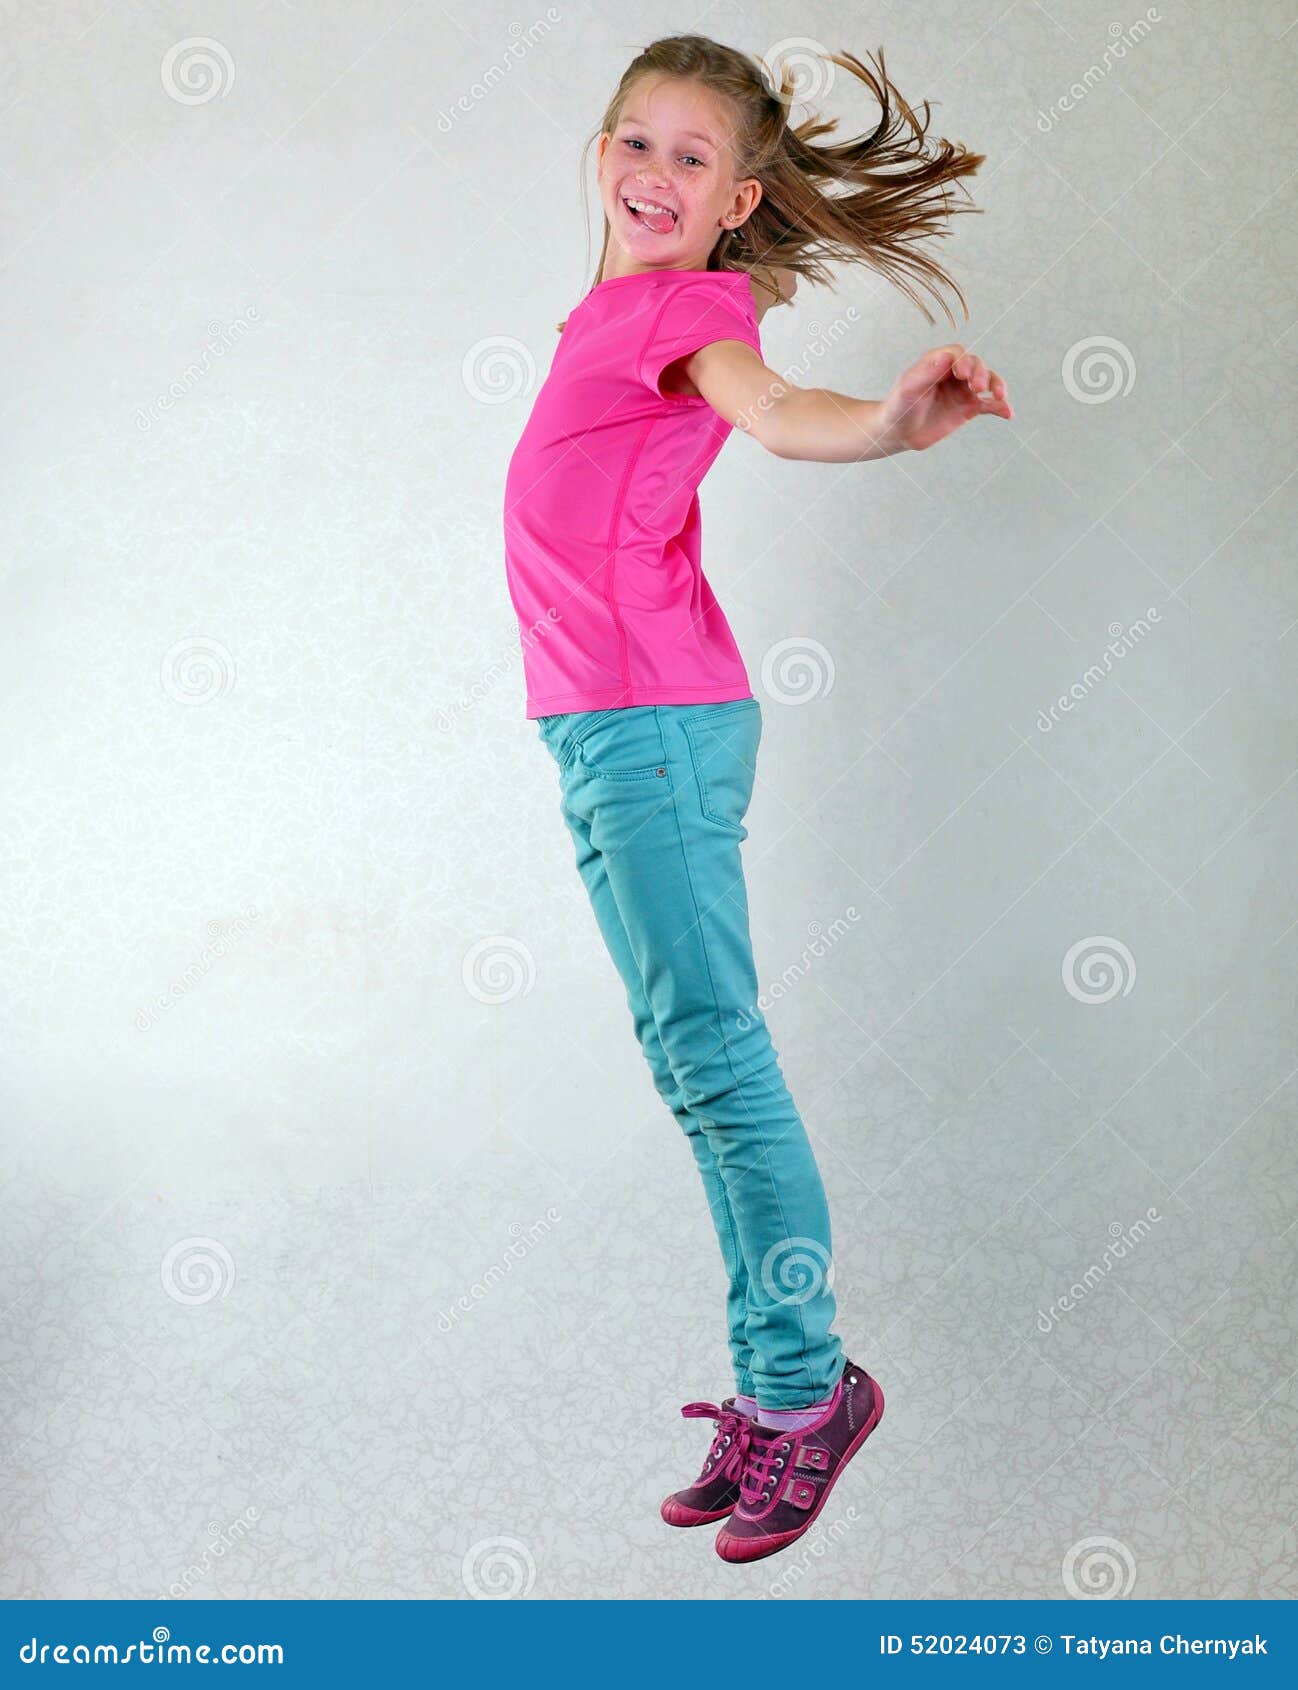 Cute Pretty Smiling Girl Jumping Stock Image - Image of beauty, people ...